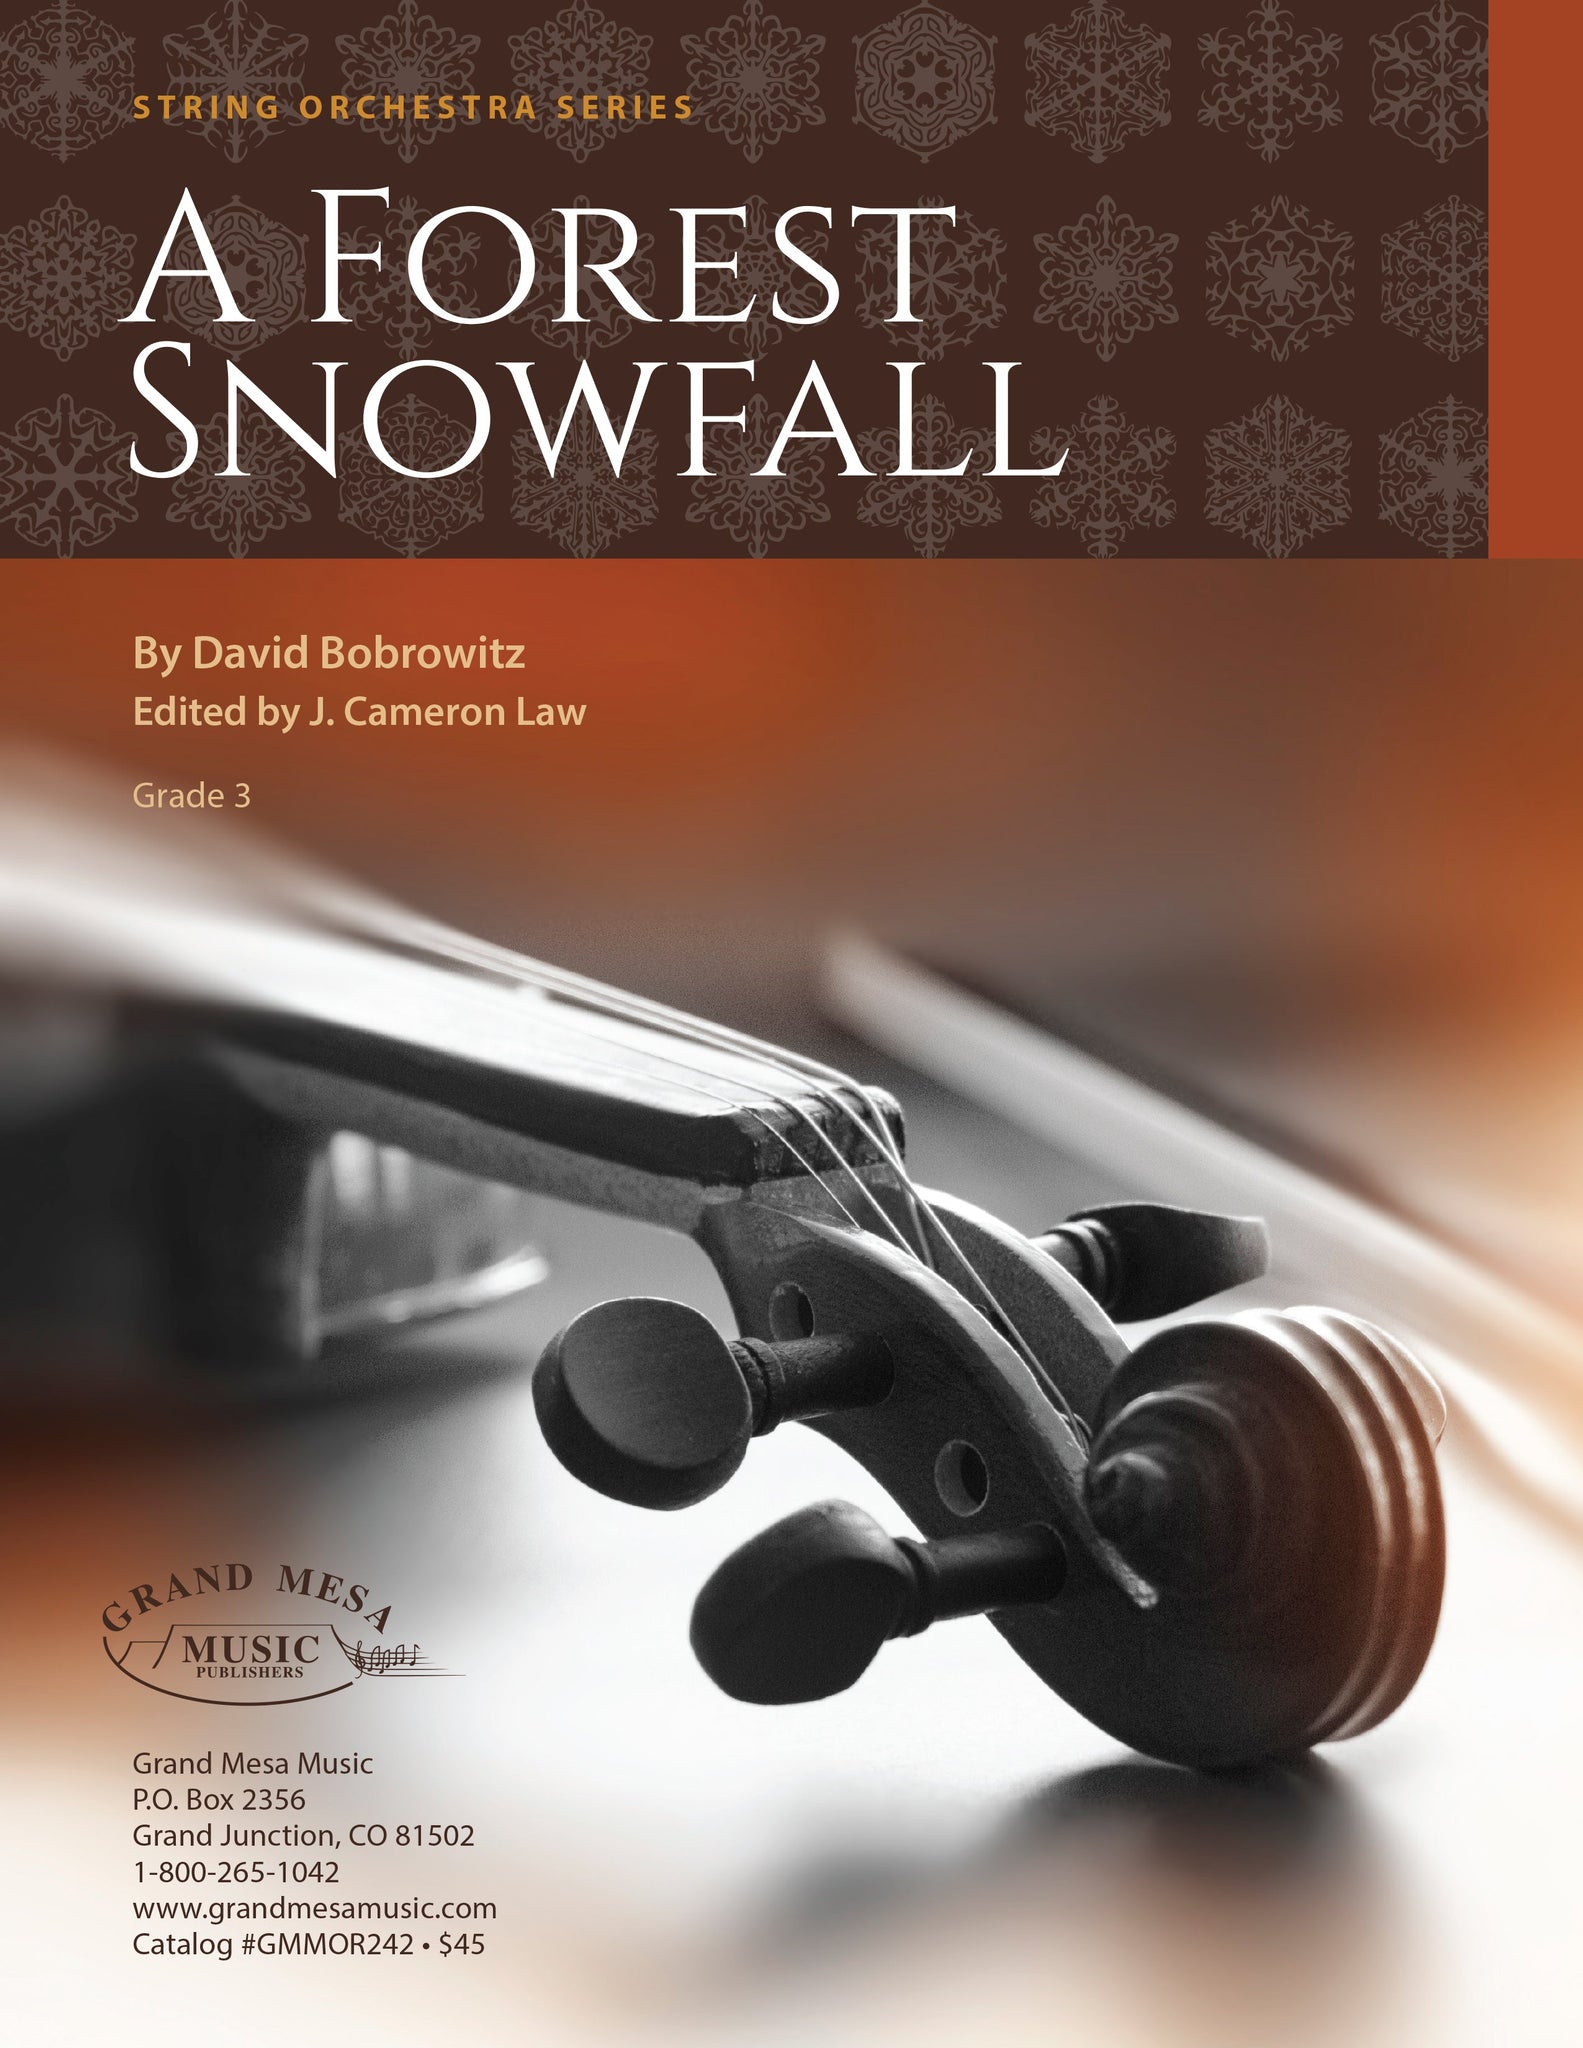 Strings sheet music cover of A Forest Snowfall, composed by David Bobrowitz.